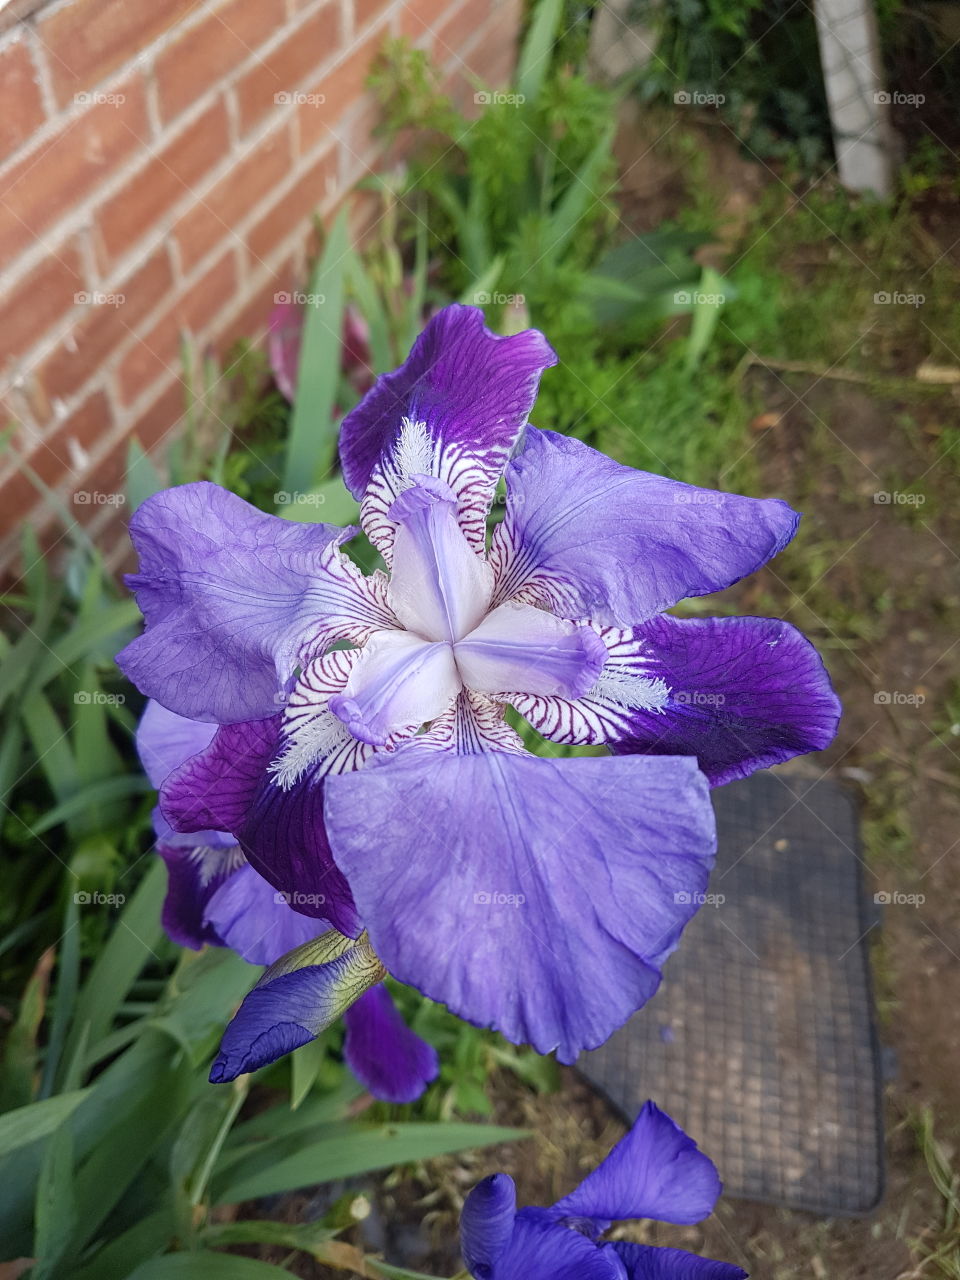 Above view of Iris in bloom